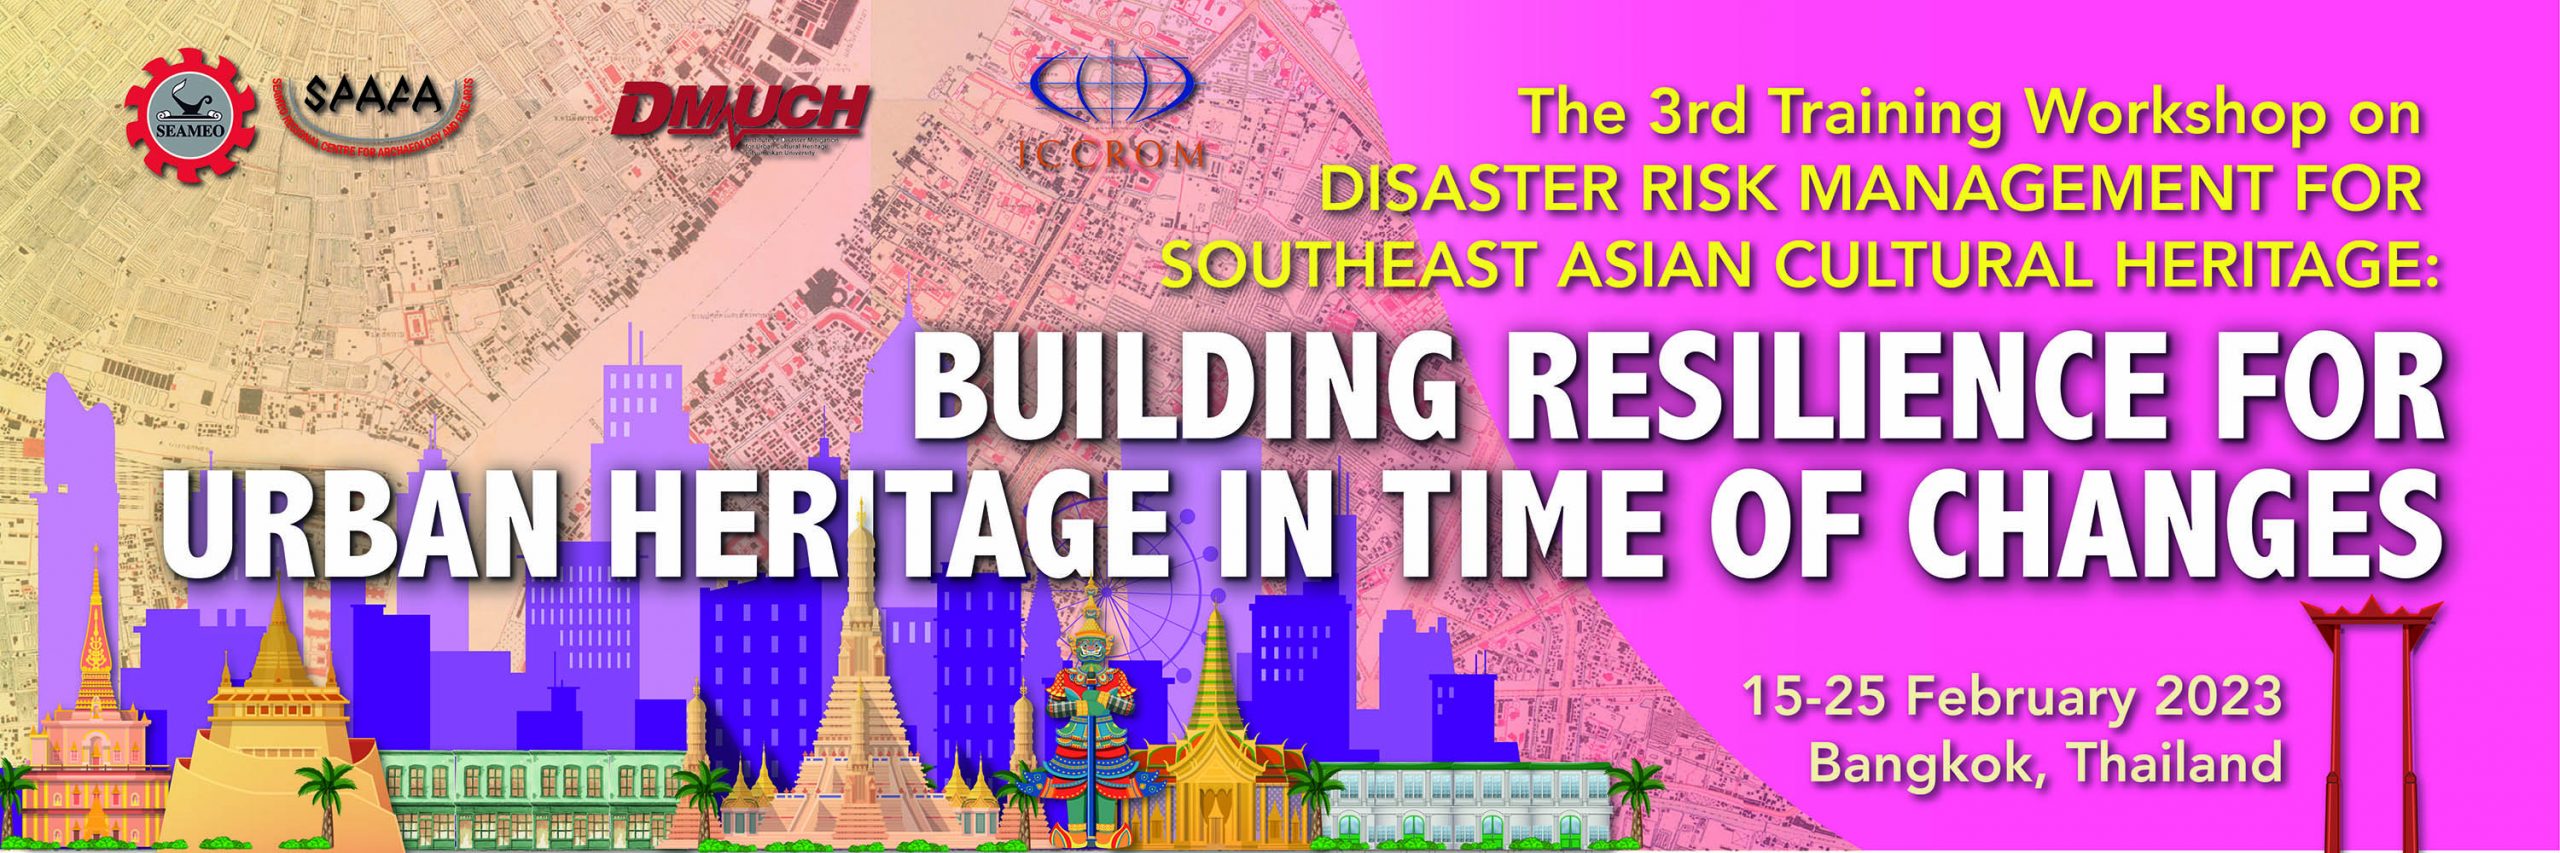 The 3rd Training Workshop on Disaster Risk Management for  Southeast Asian Cultural Heritage